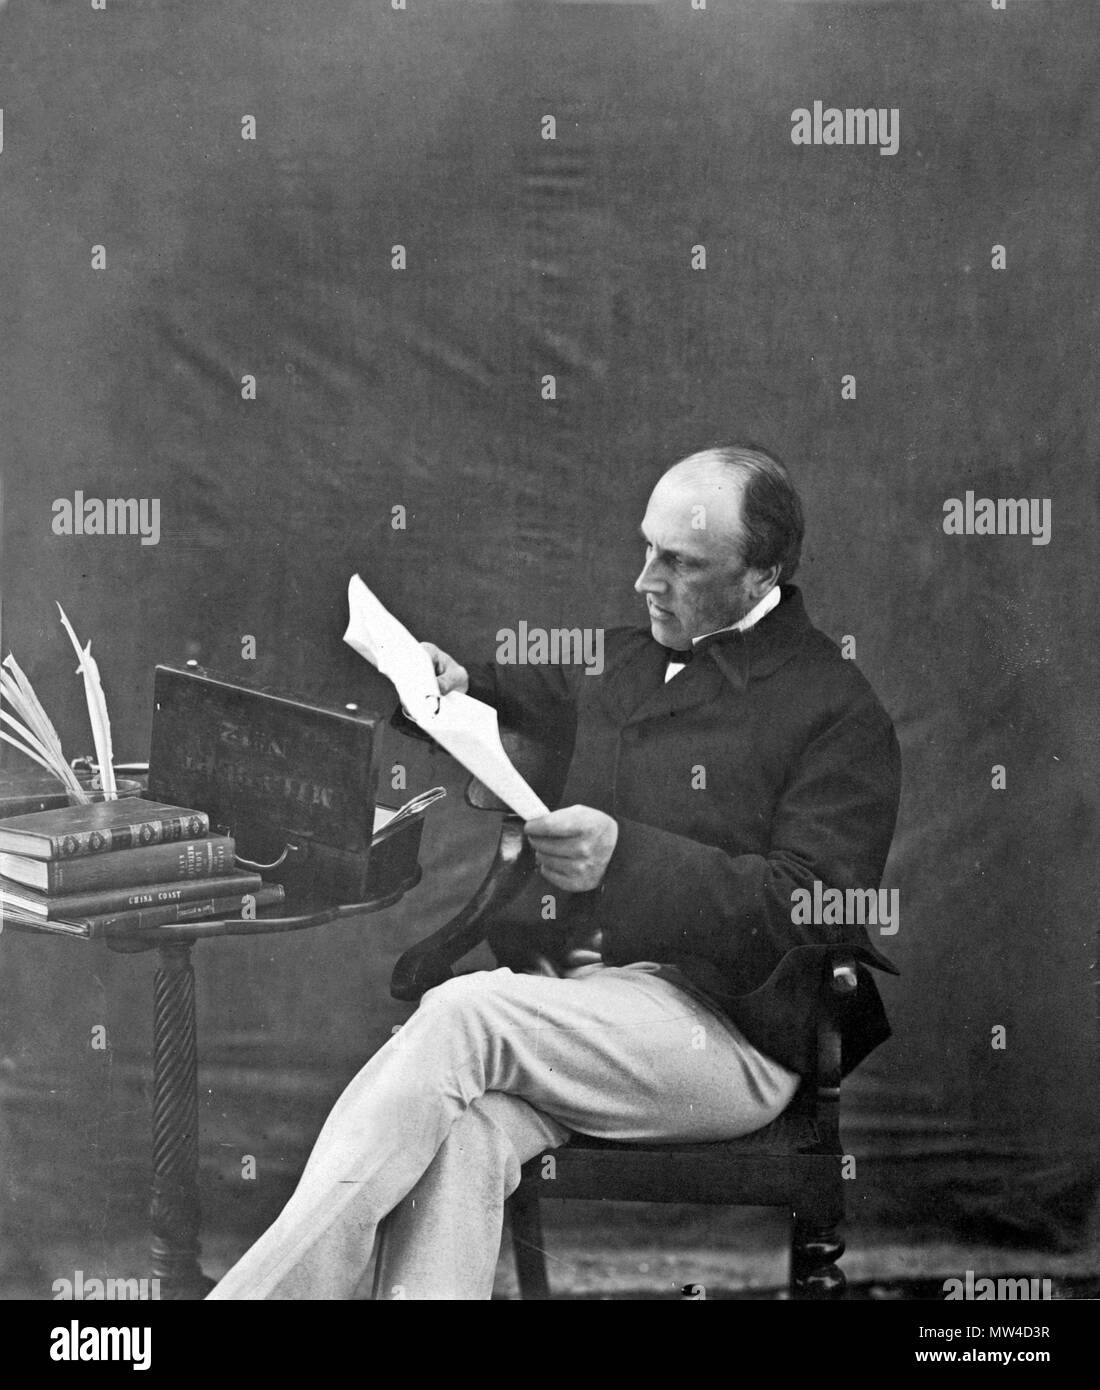 . English: [Lord Canning, Viceroy and Governor General of India, from March 1856 to March 1862] Unknown Artist Date:  1860 Medium:  Albumen silver print from glass negative Dimensions:  Image: 24.1 x 20.9 cm (9 1/2 x 8 1/4 in.) Mount: 33 x 26.4 cm (13 x 10 3/8 in.) Mount (2nd): 30.5 x 24.7 cm (12 x 9 3/4 in.) Classification:  Photographs Credit Line:  Gilman Collection, Purchase, Cynthia Hazen Polsky Gift, 2005 Accession Number:  2005.100.491.1 (1) This artwork is not on display . 1860. Unknown 376 Lord Canning, Viceroy and Governor General of India, from March 1856 to March 1862 Stock Photo